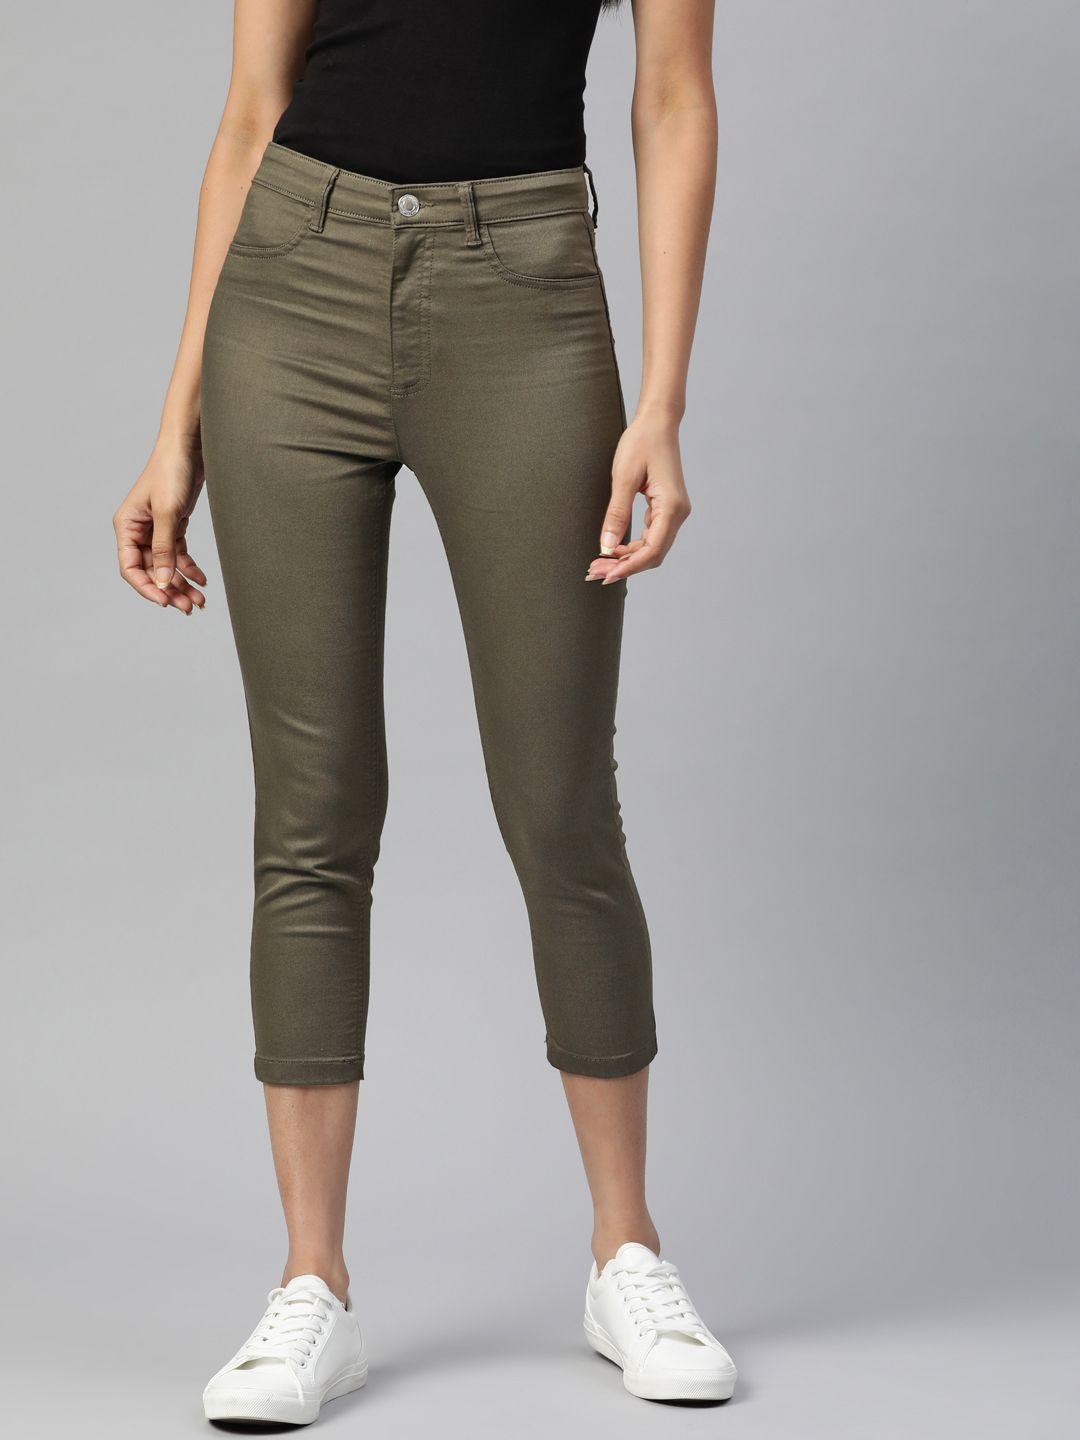 marks-&-spencer-women-olive-green-solid-three-fourth-jeggings